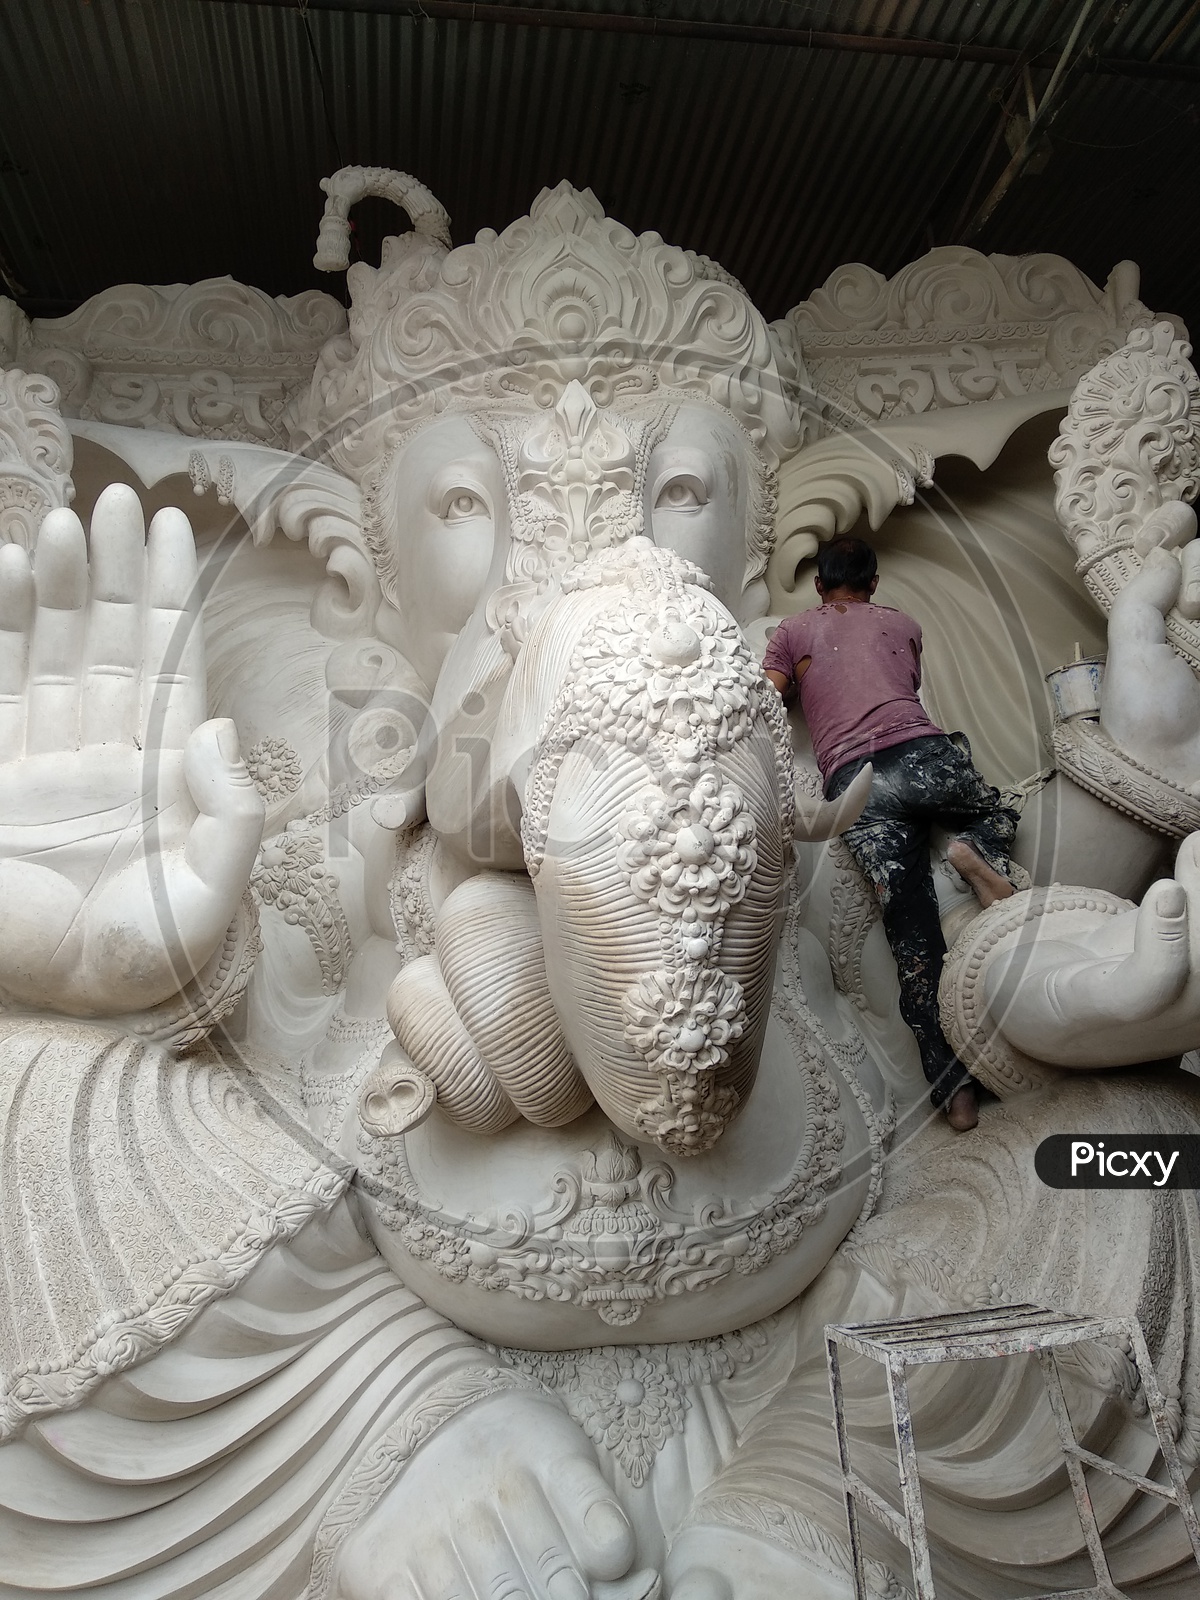 Prepartion of Ganesh Idol for Ganesh Chathurthi. A Man sat and Cleaning the Dust, Final Finshing